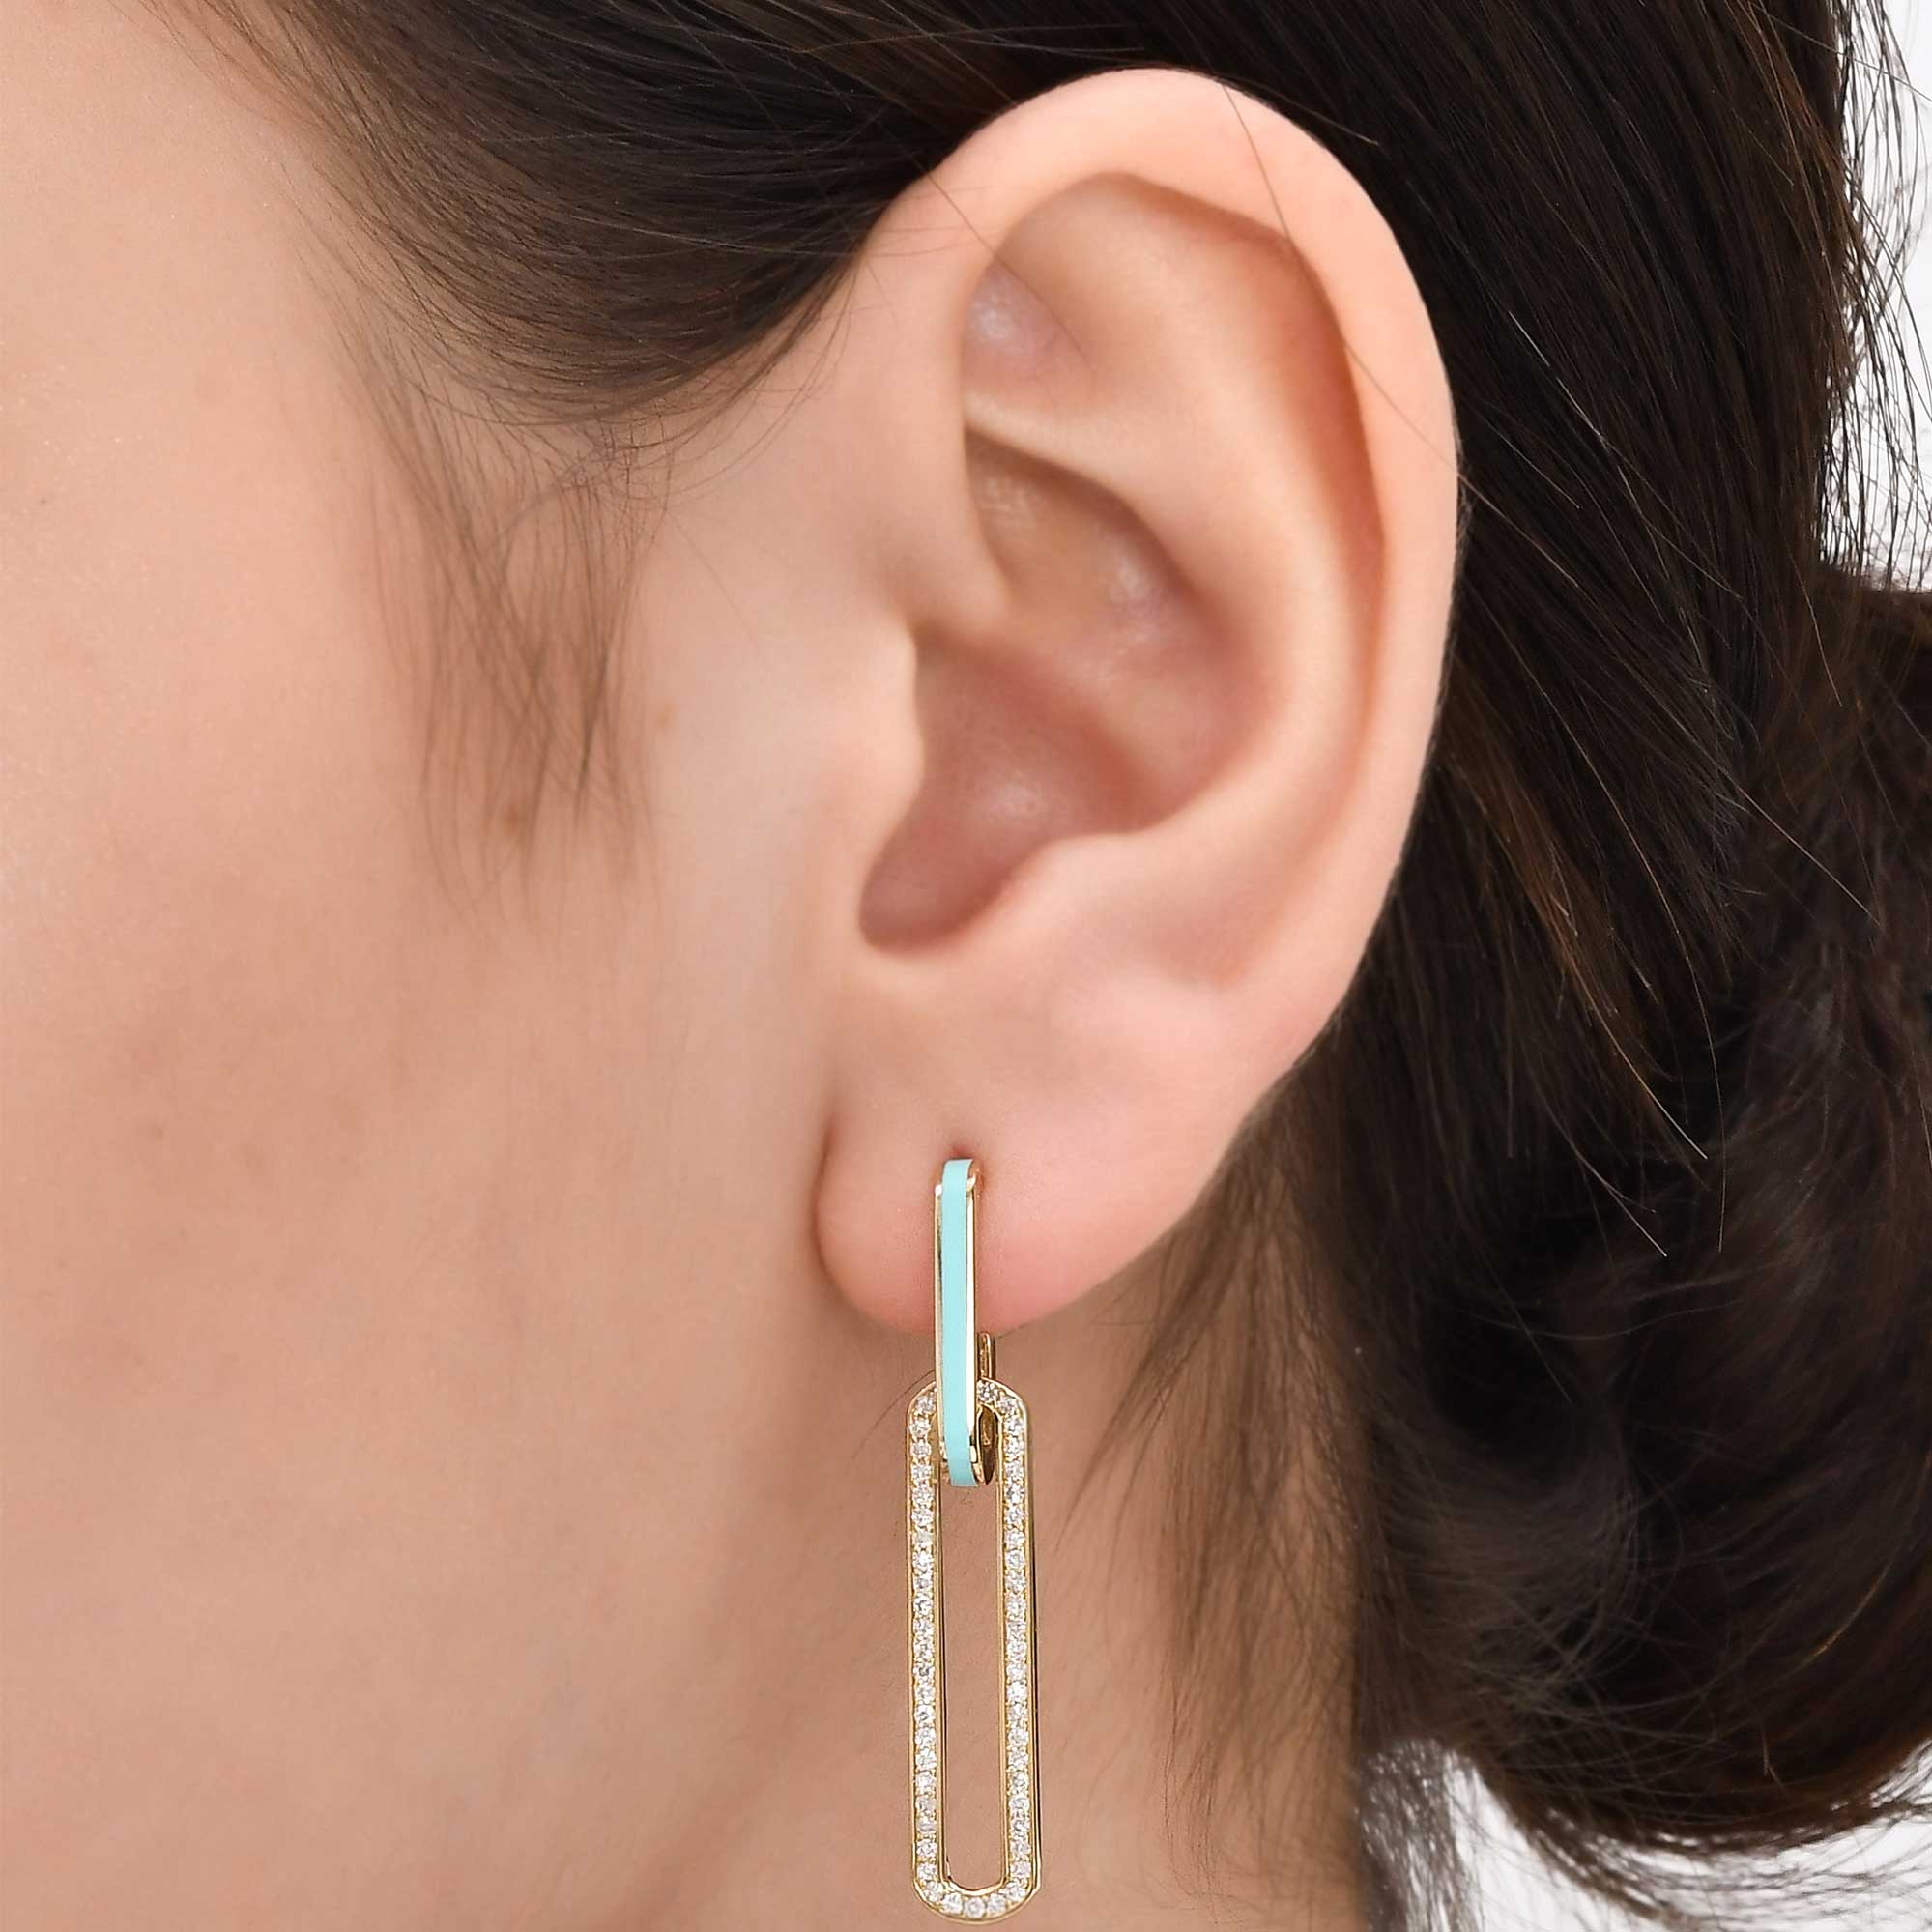 ATTACH EARING